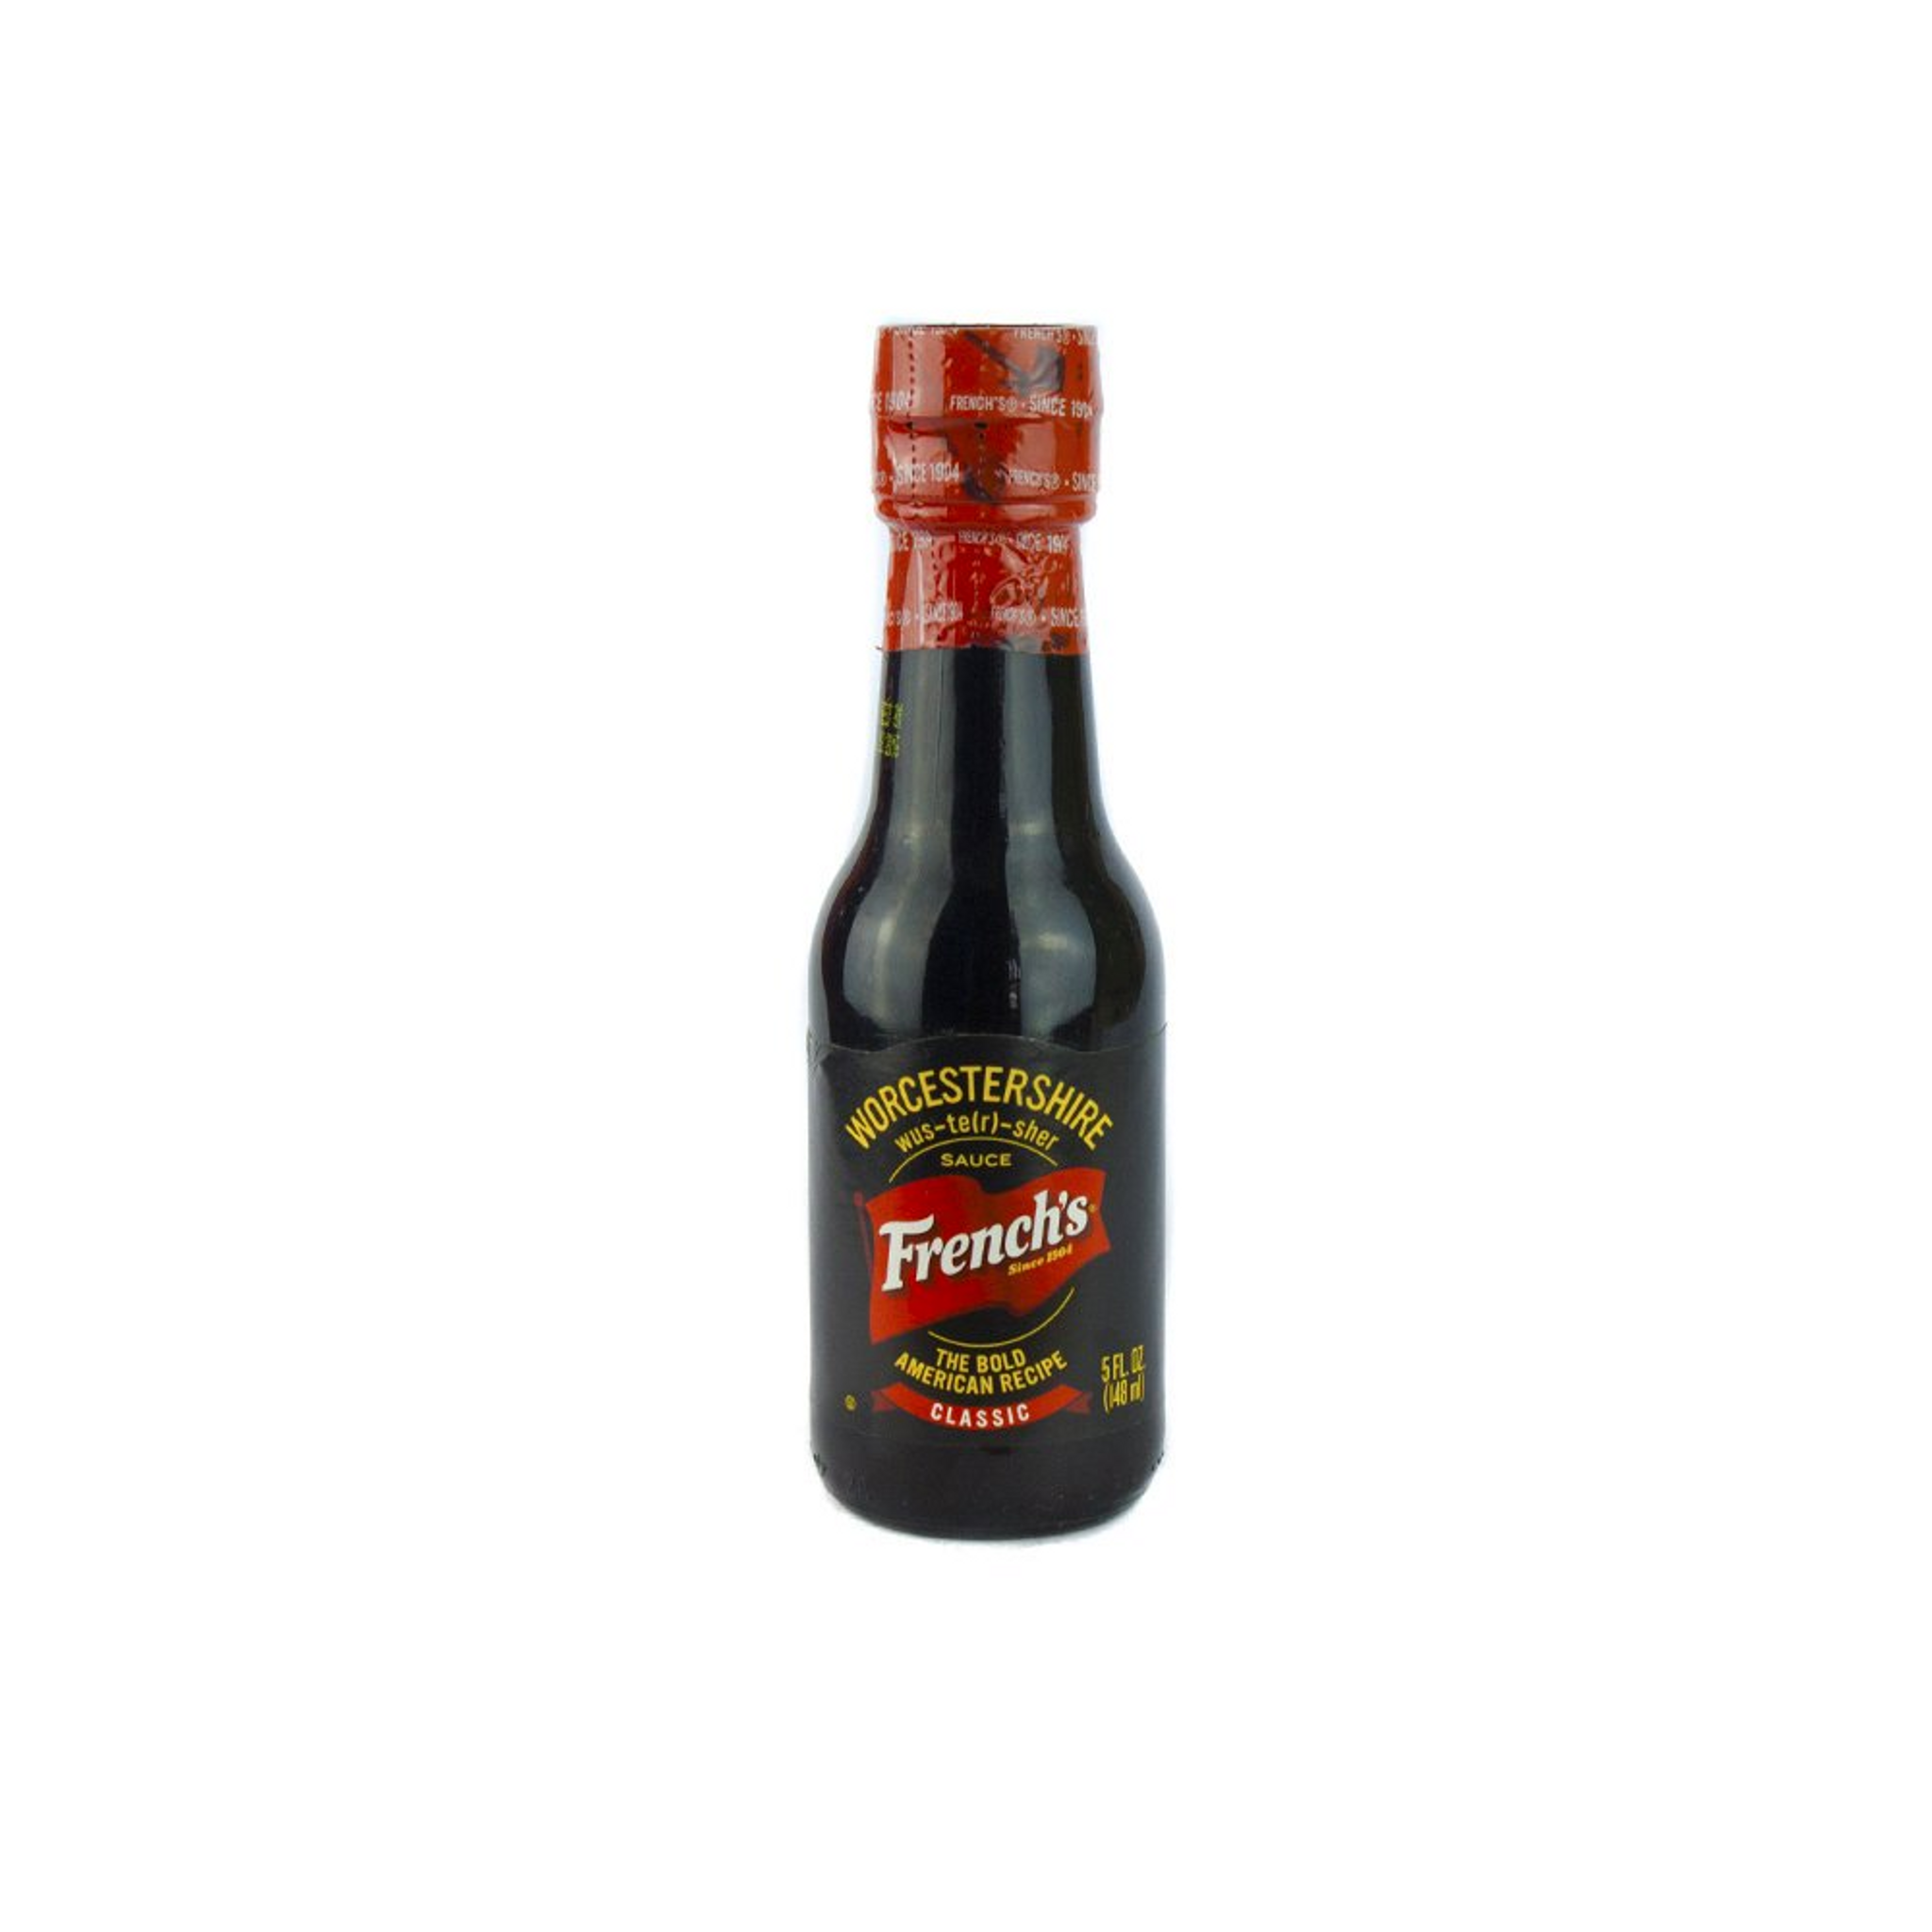 French's Worcestershire Sauce (5 oz) - Wholey's Curbside